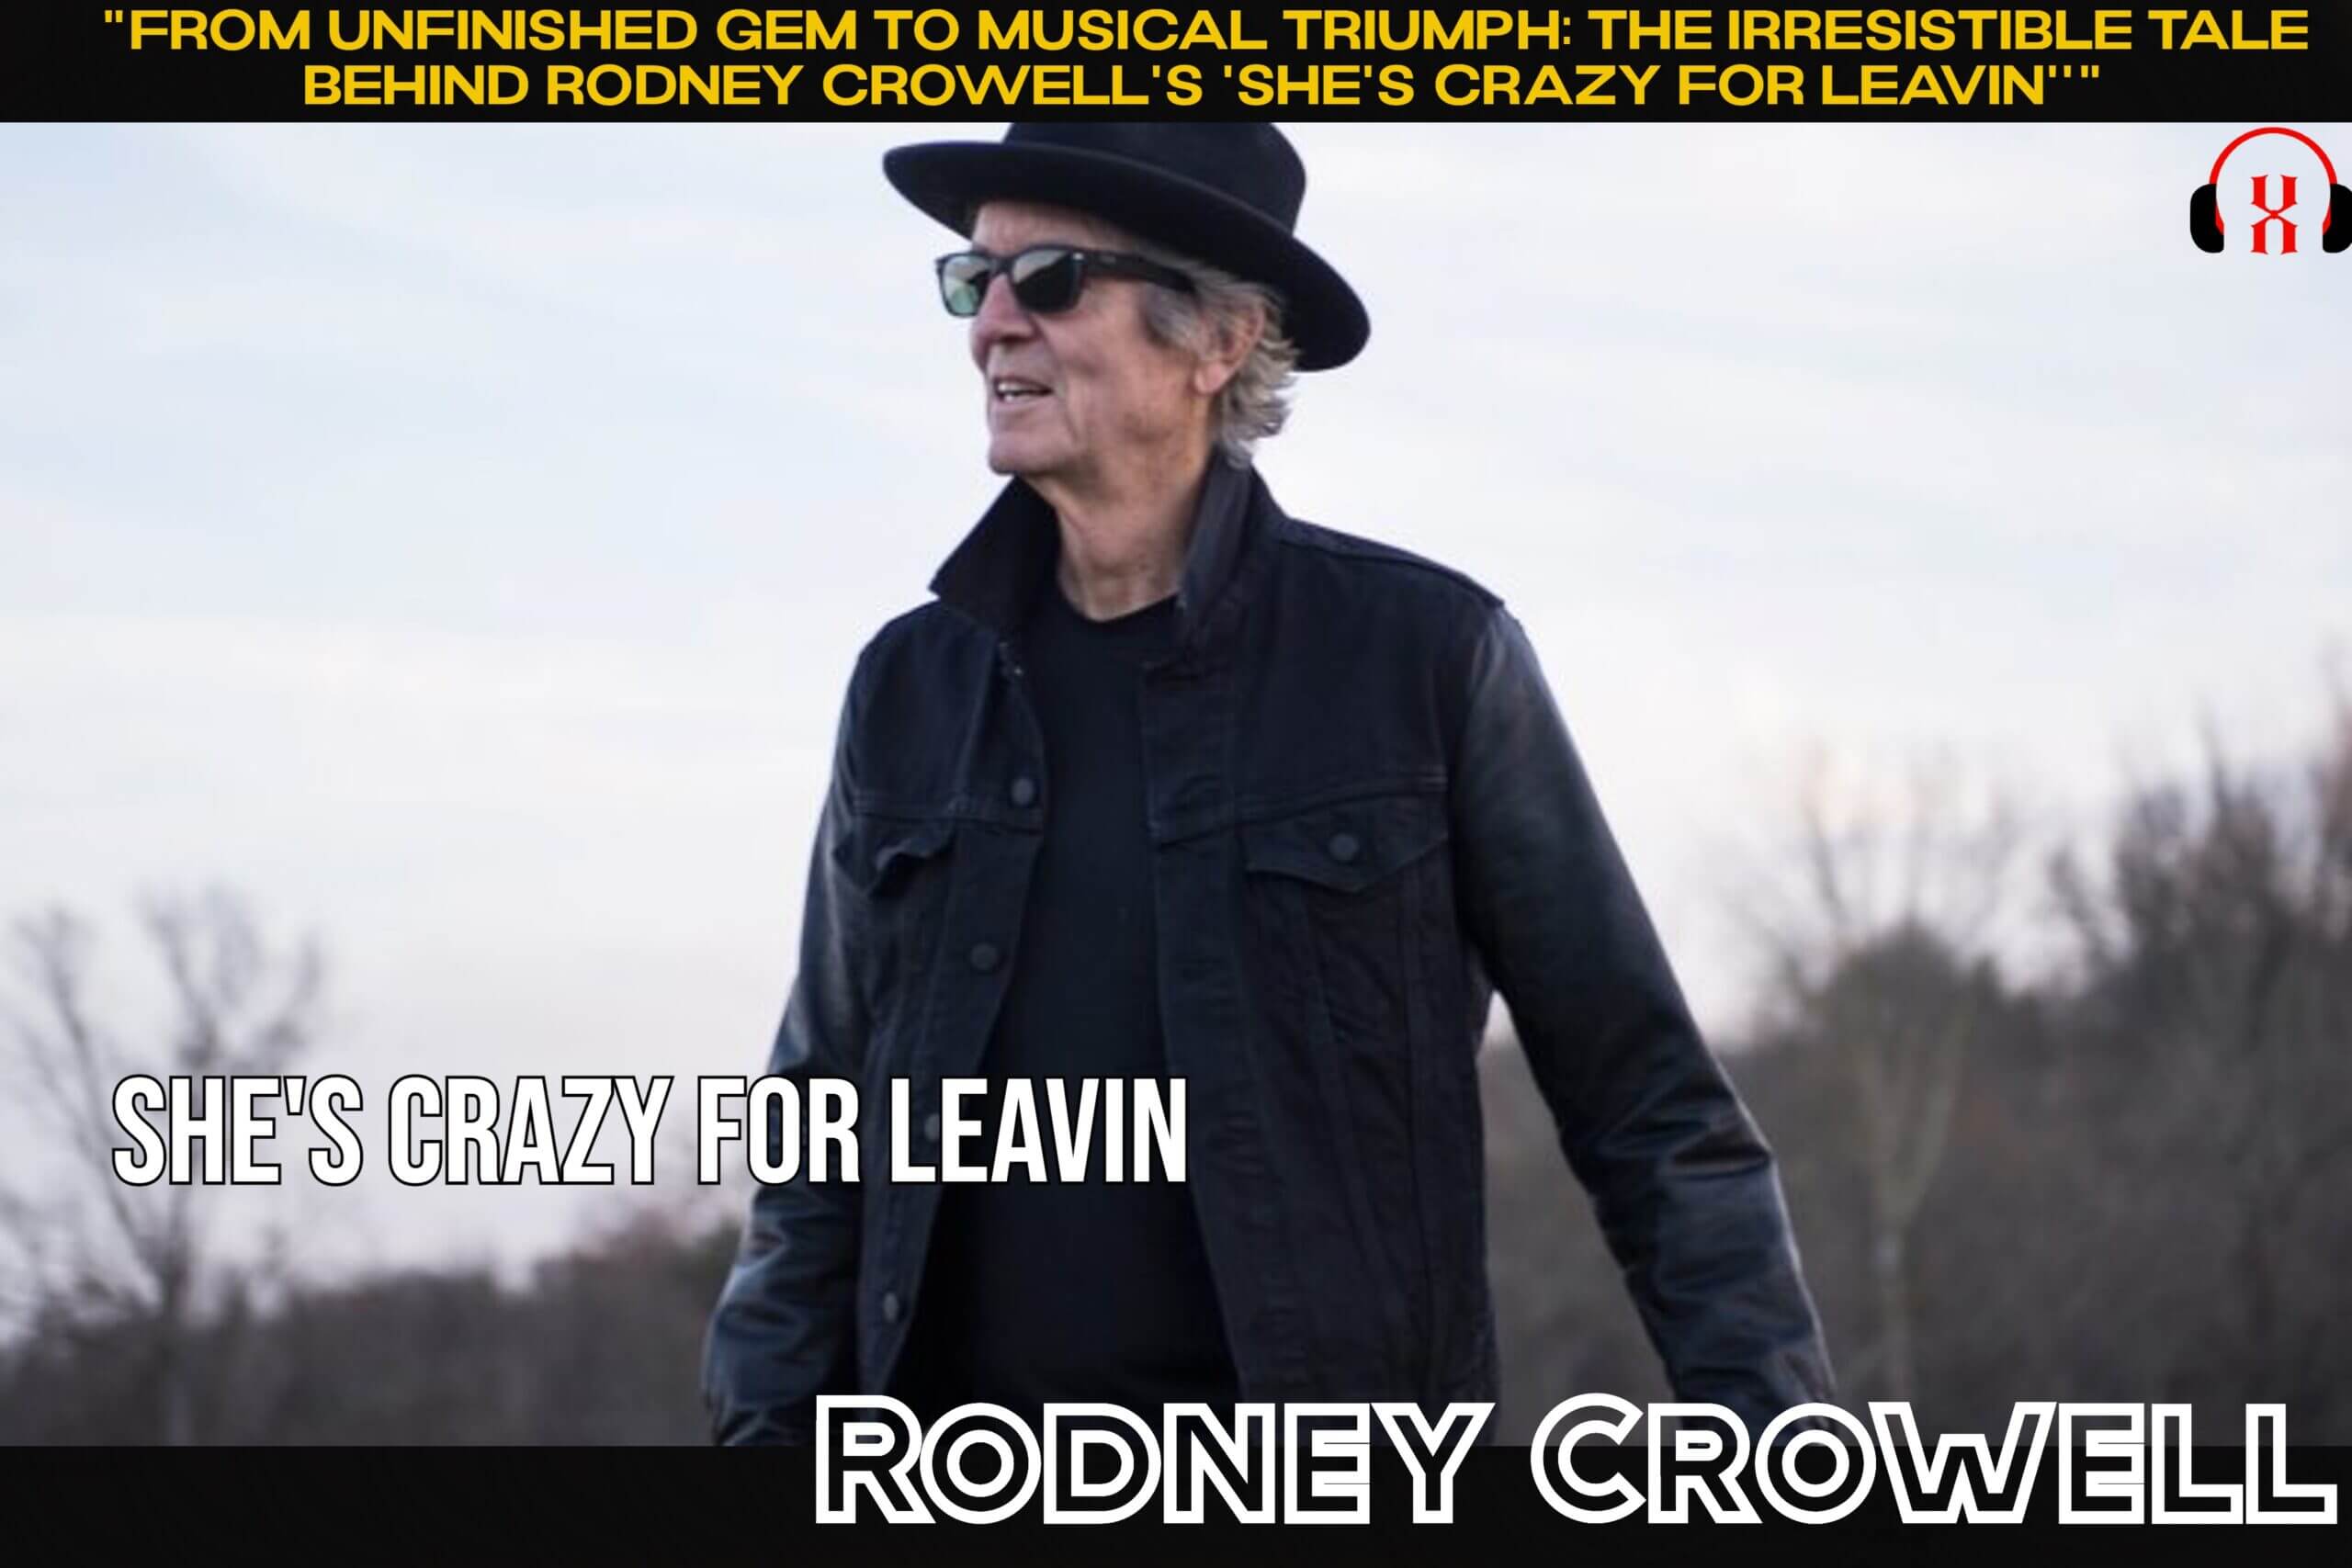 From Unfinished Gem to Musical Triumph: The Irresistible Tale Behind Rodney Crowell's 'She's Crazy For Leavin